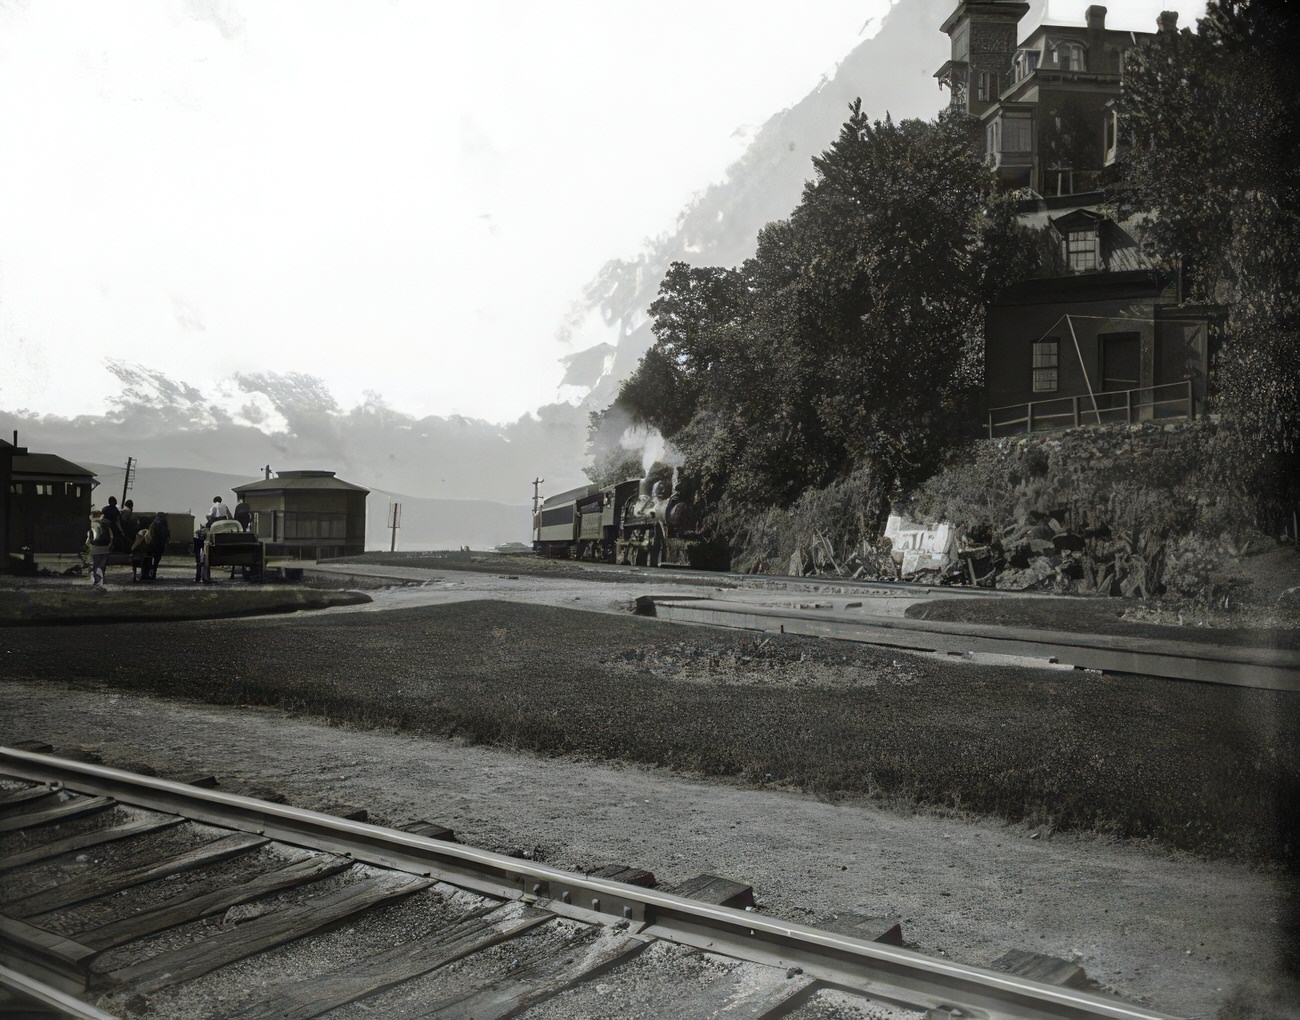 Steam Locomotive Passing A Large House At A Railroad Junction In Spuyten Duyvil, Circa 1890